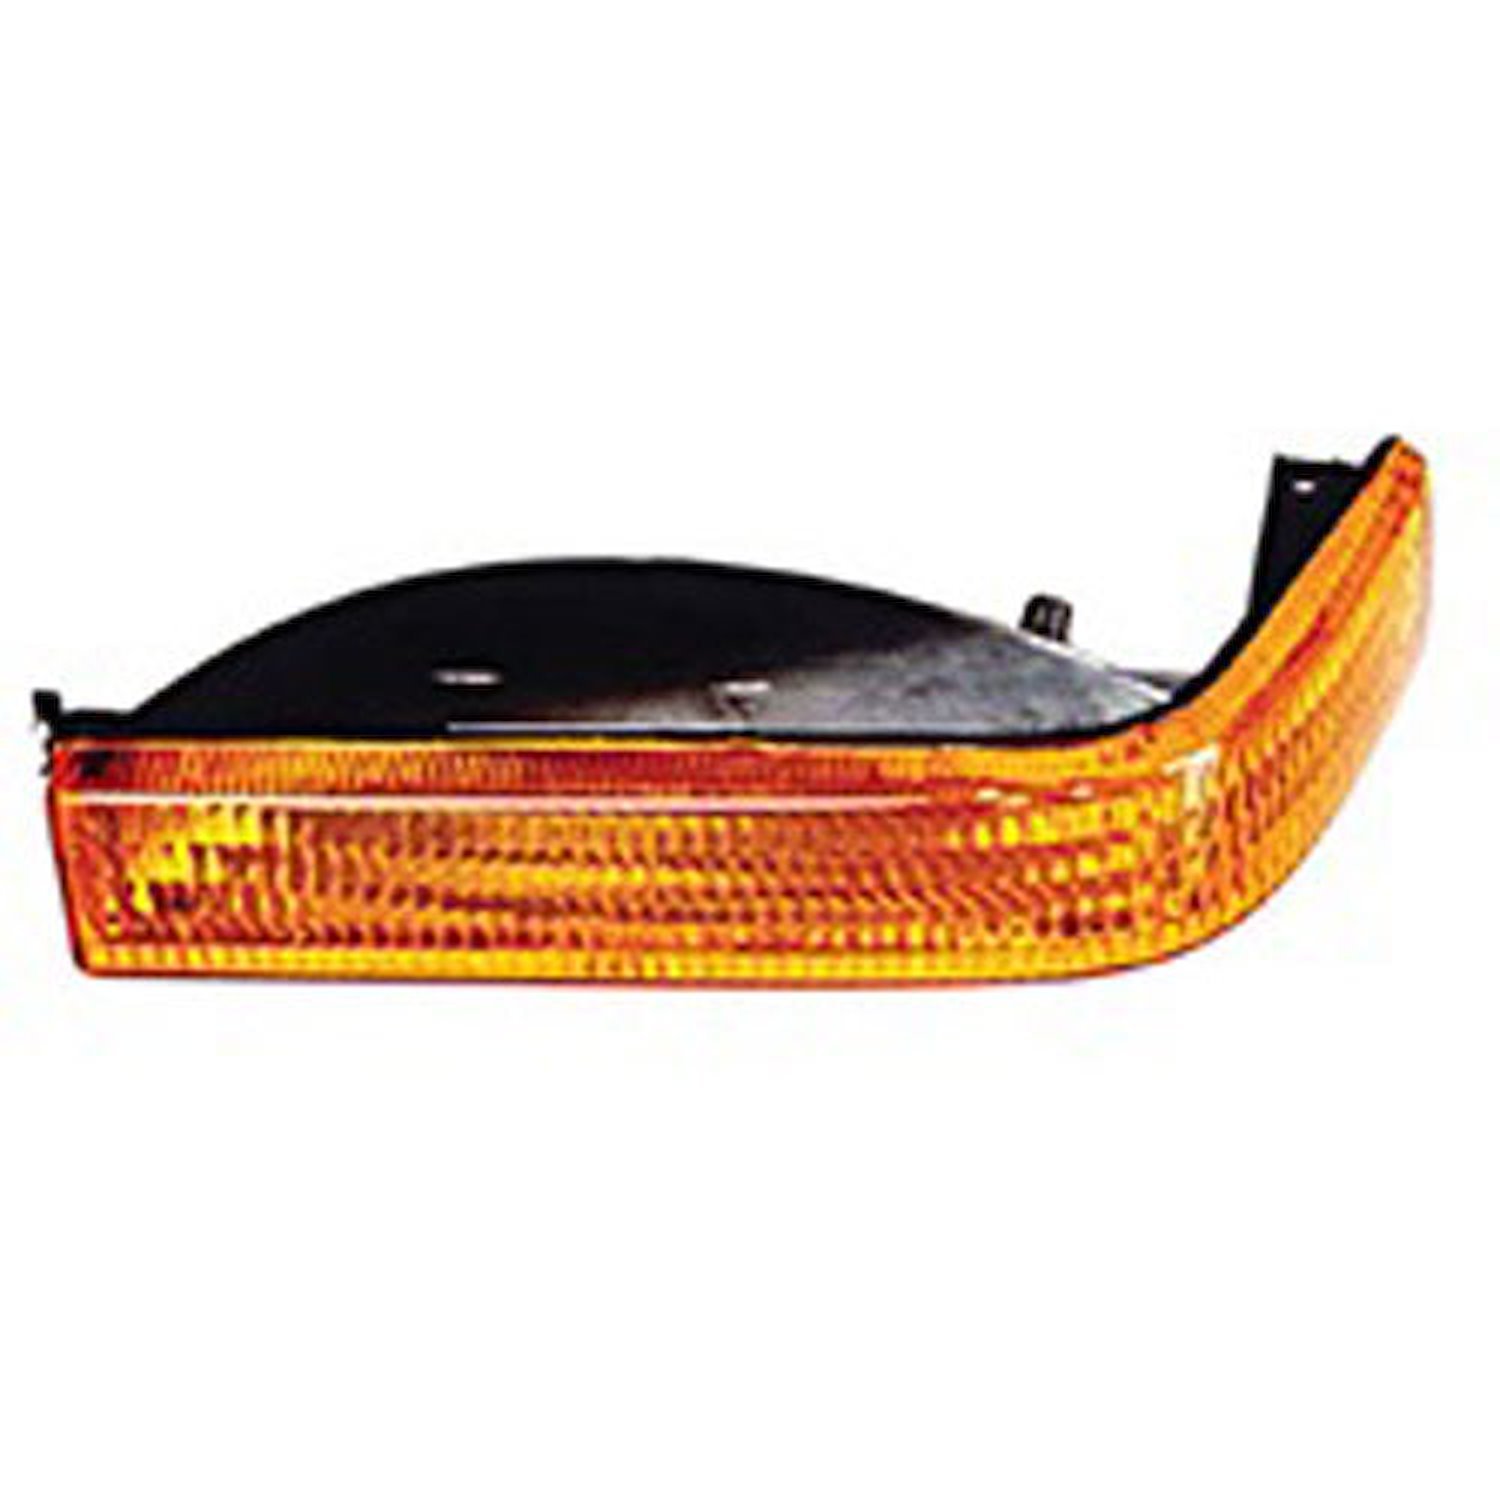 This amber turn signal lens from Omix-ADA fits